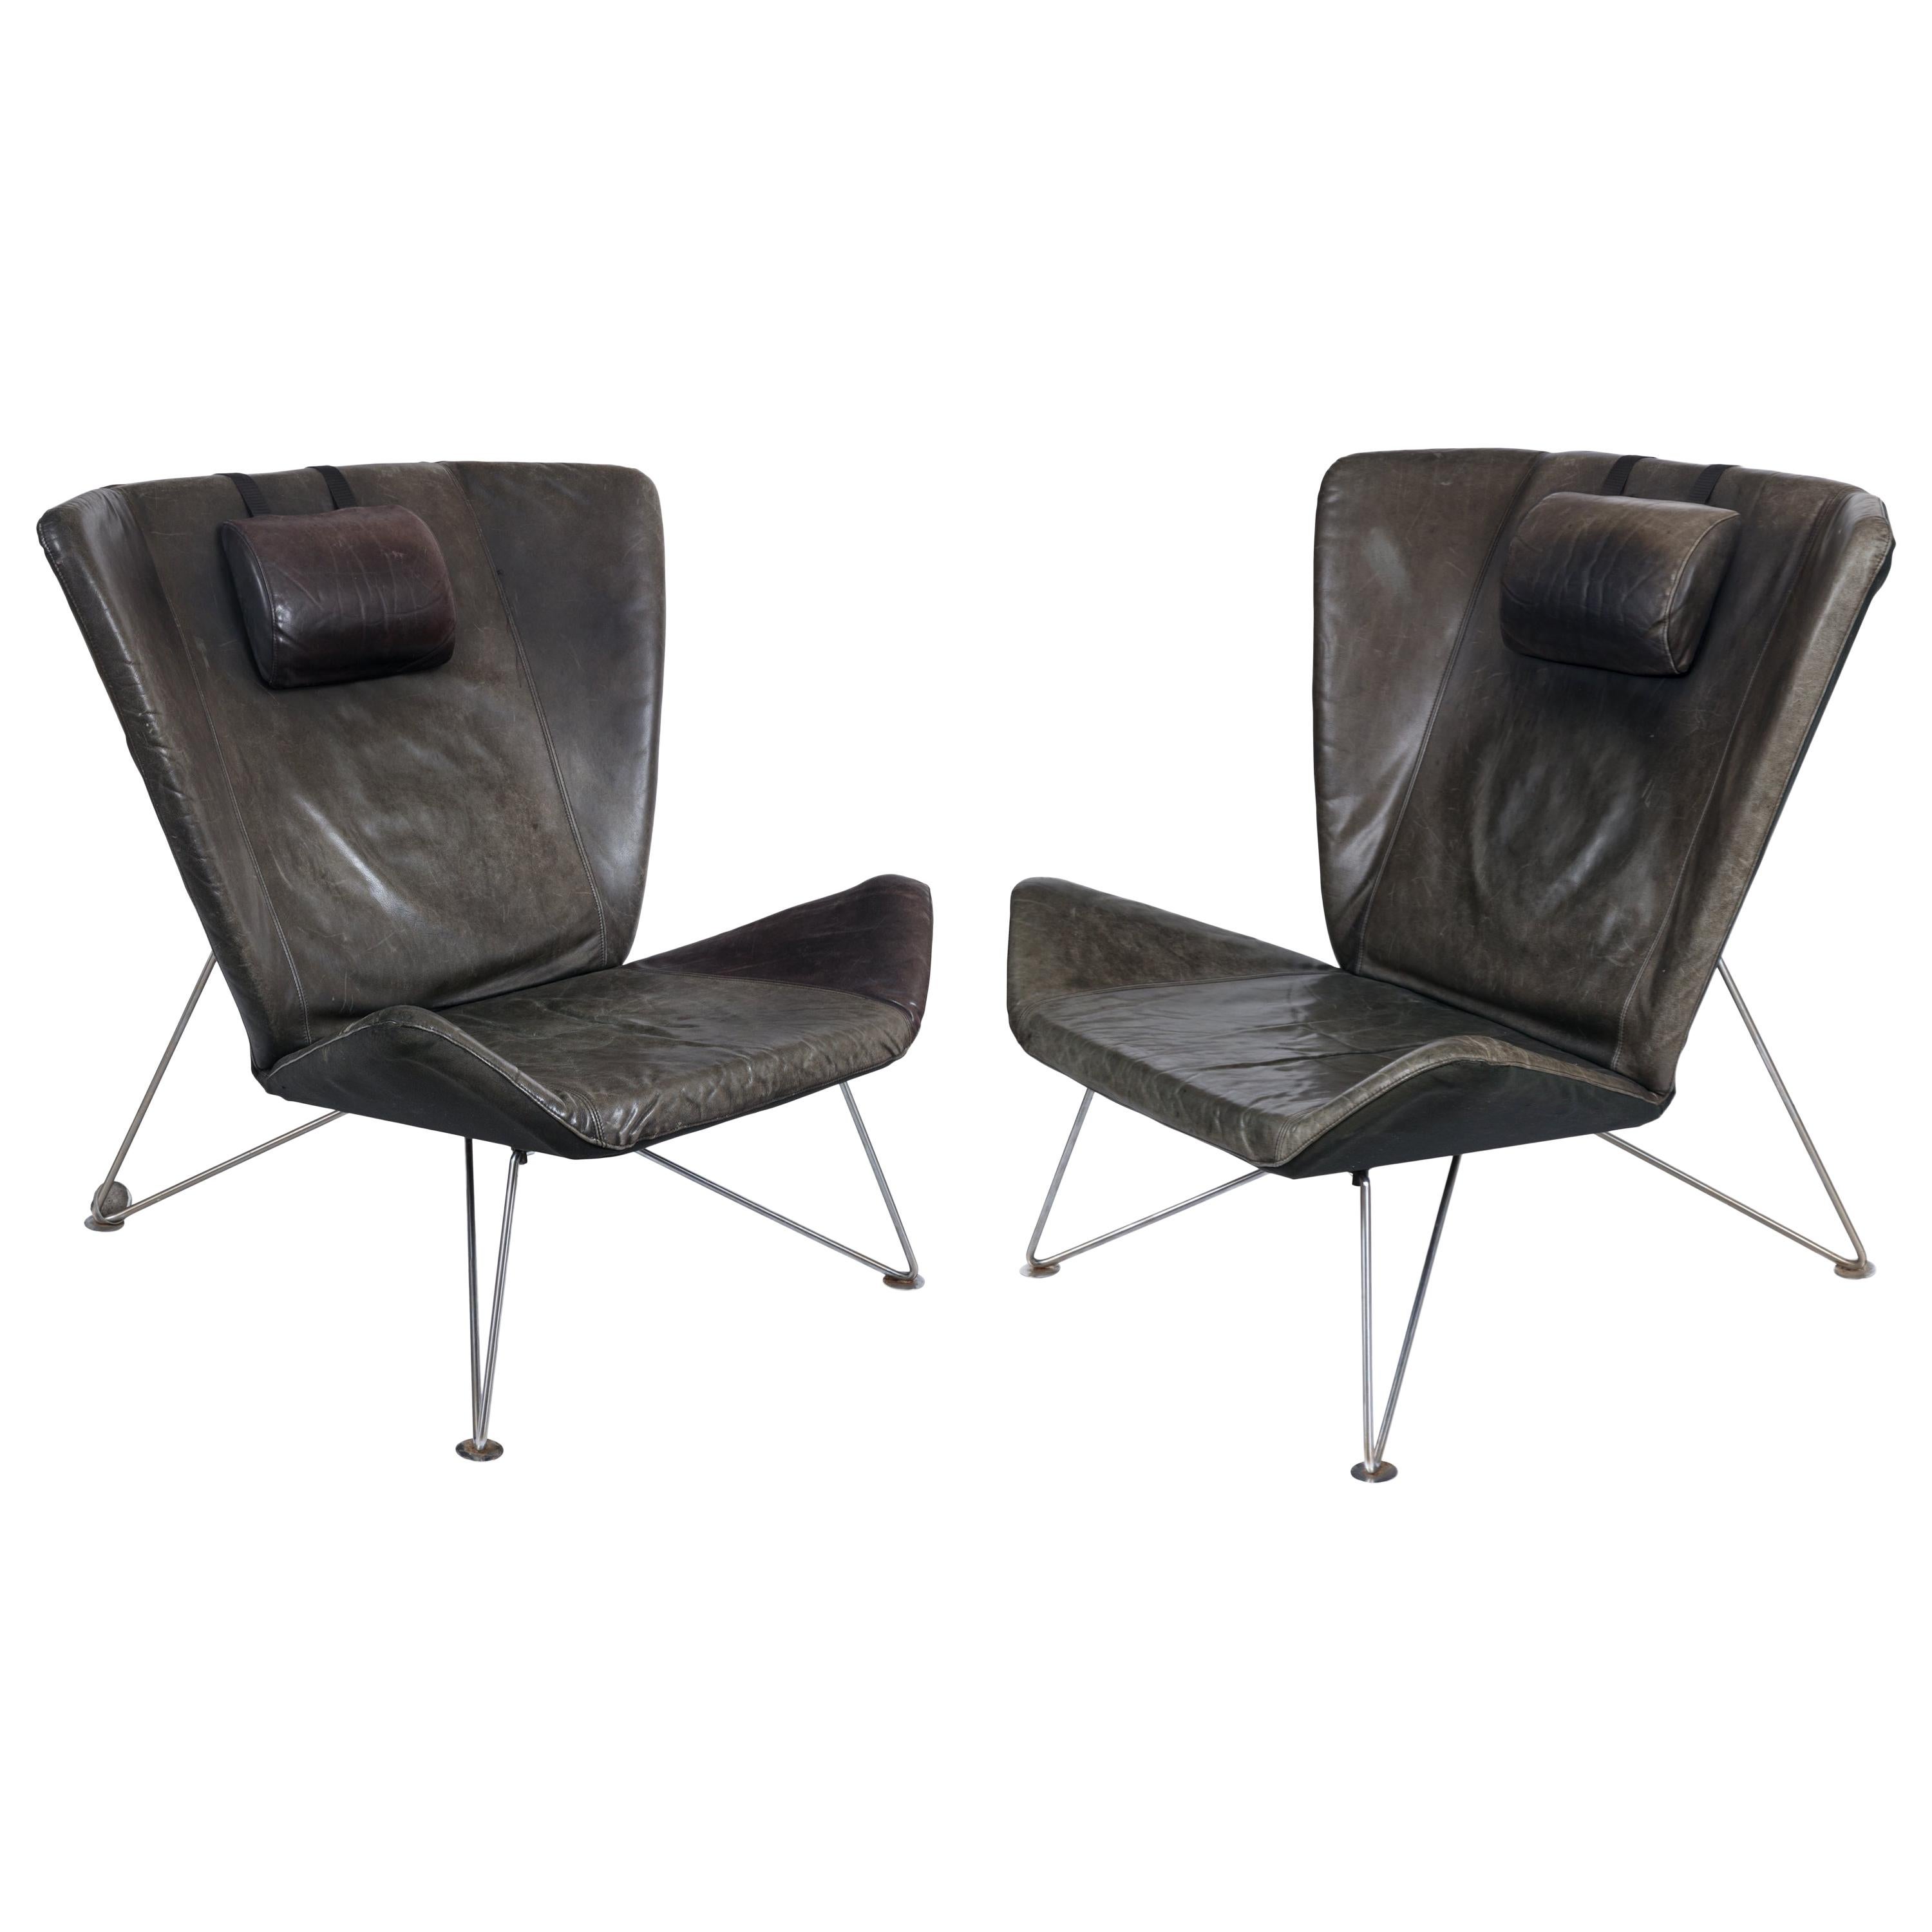 Scandinavian Modern Brown Leather Lounge Chairs, Sweden, 1970s